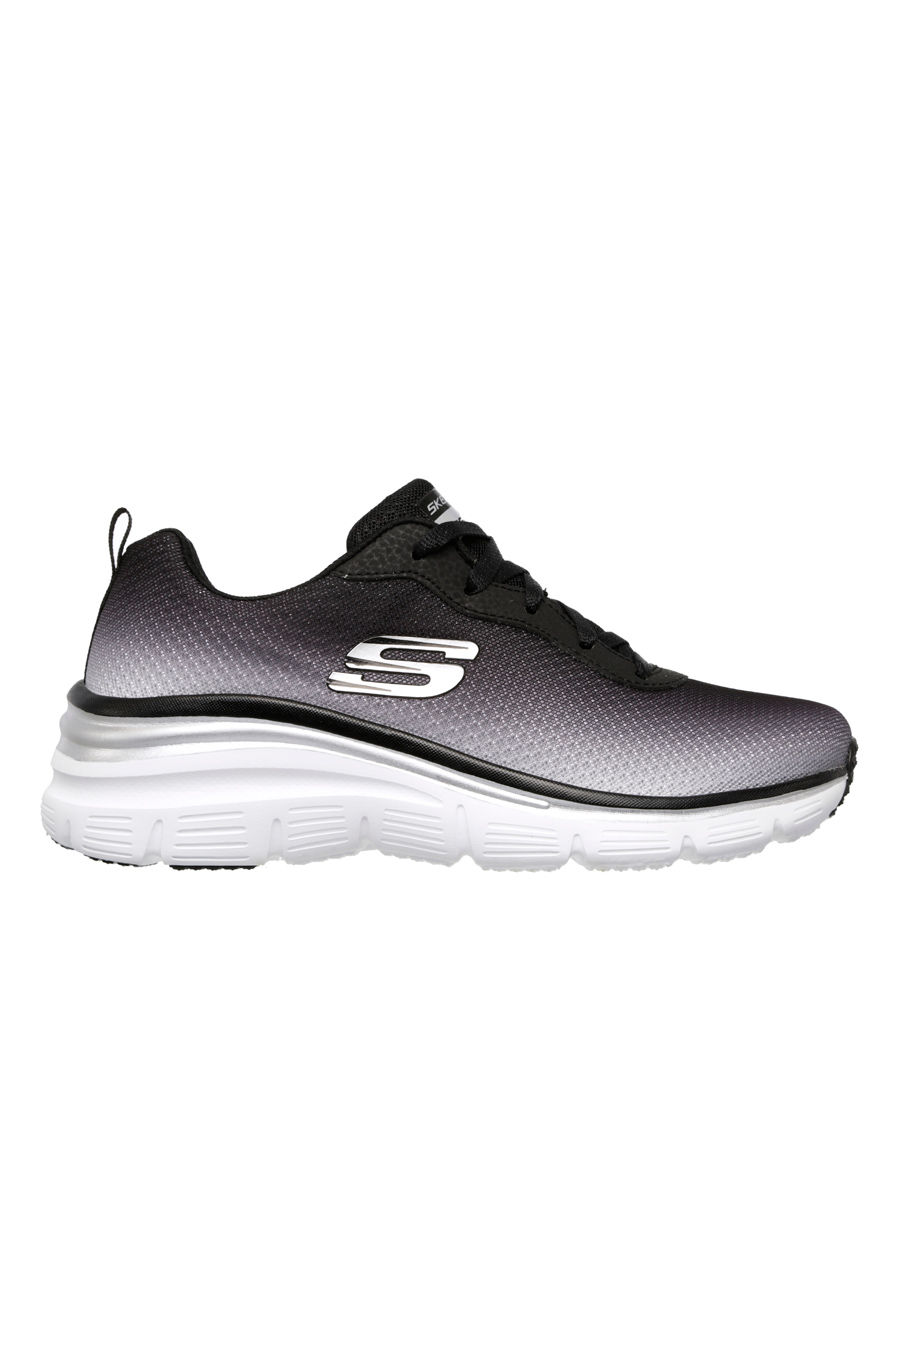 SKECHERS FASHION FIT-BUILD UP SNEAKERS nero per donna